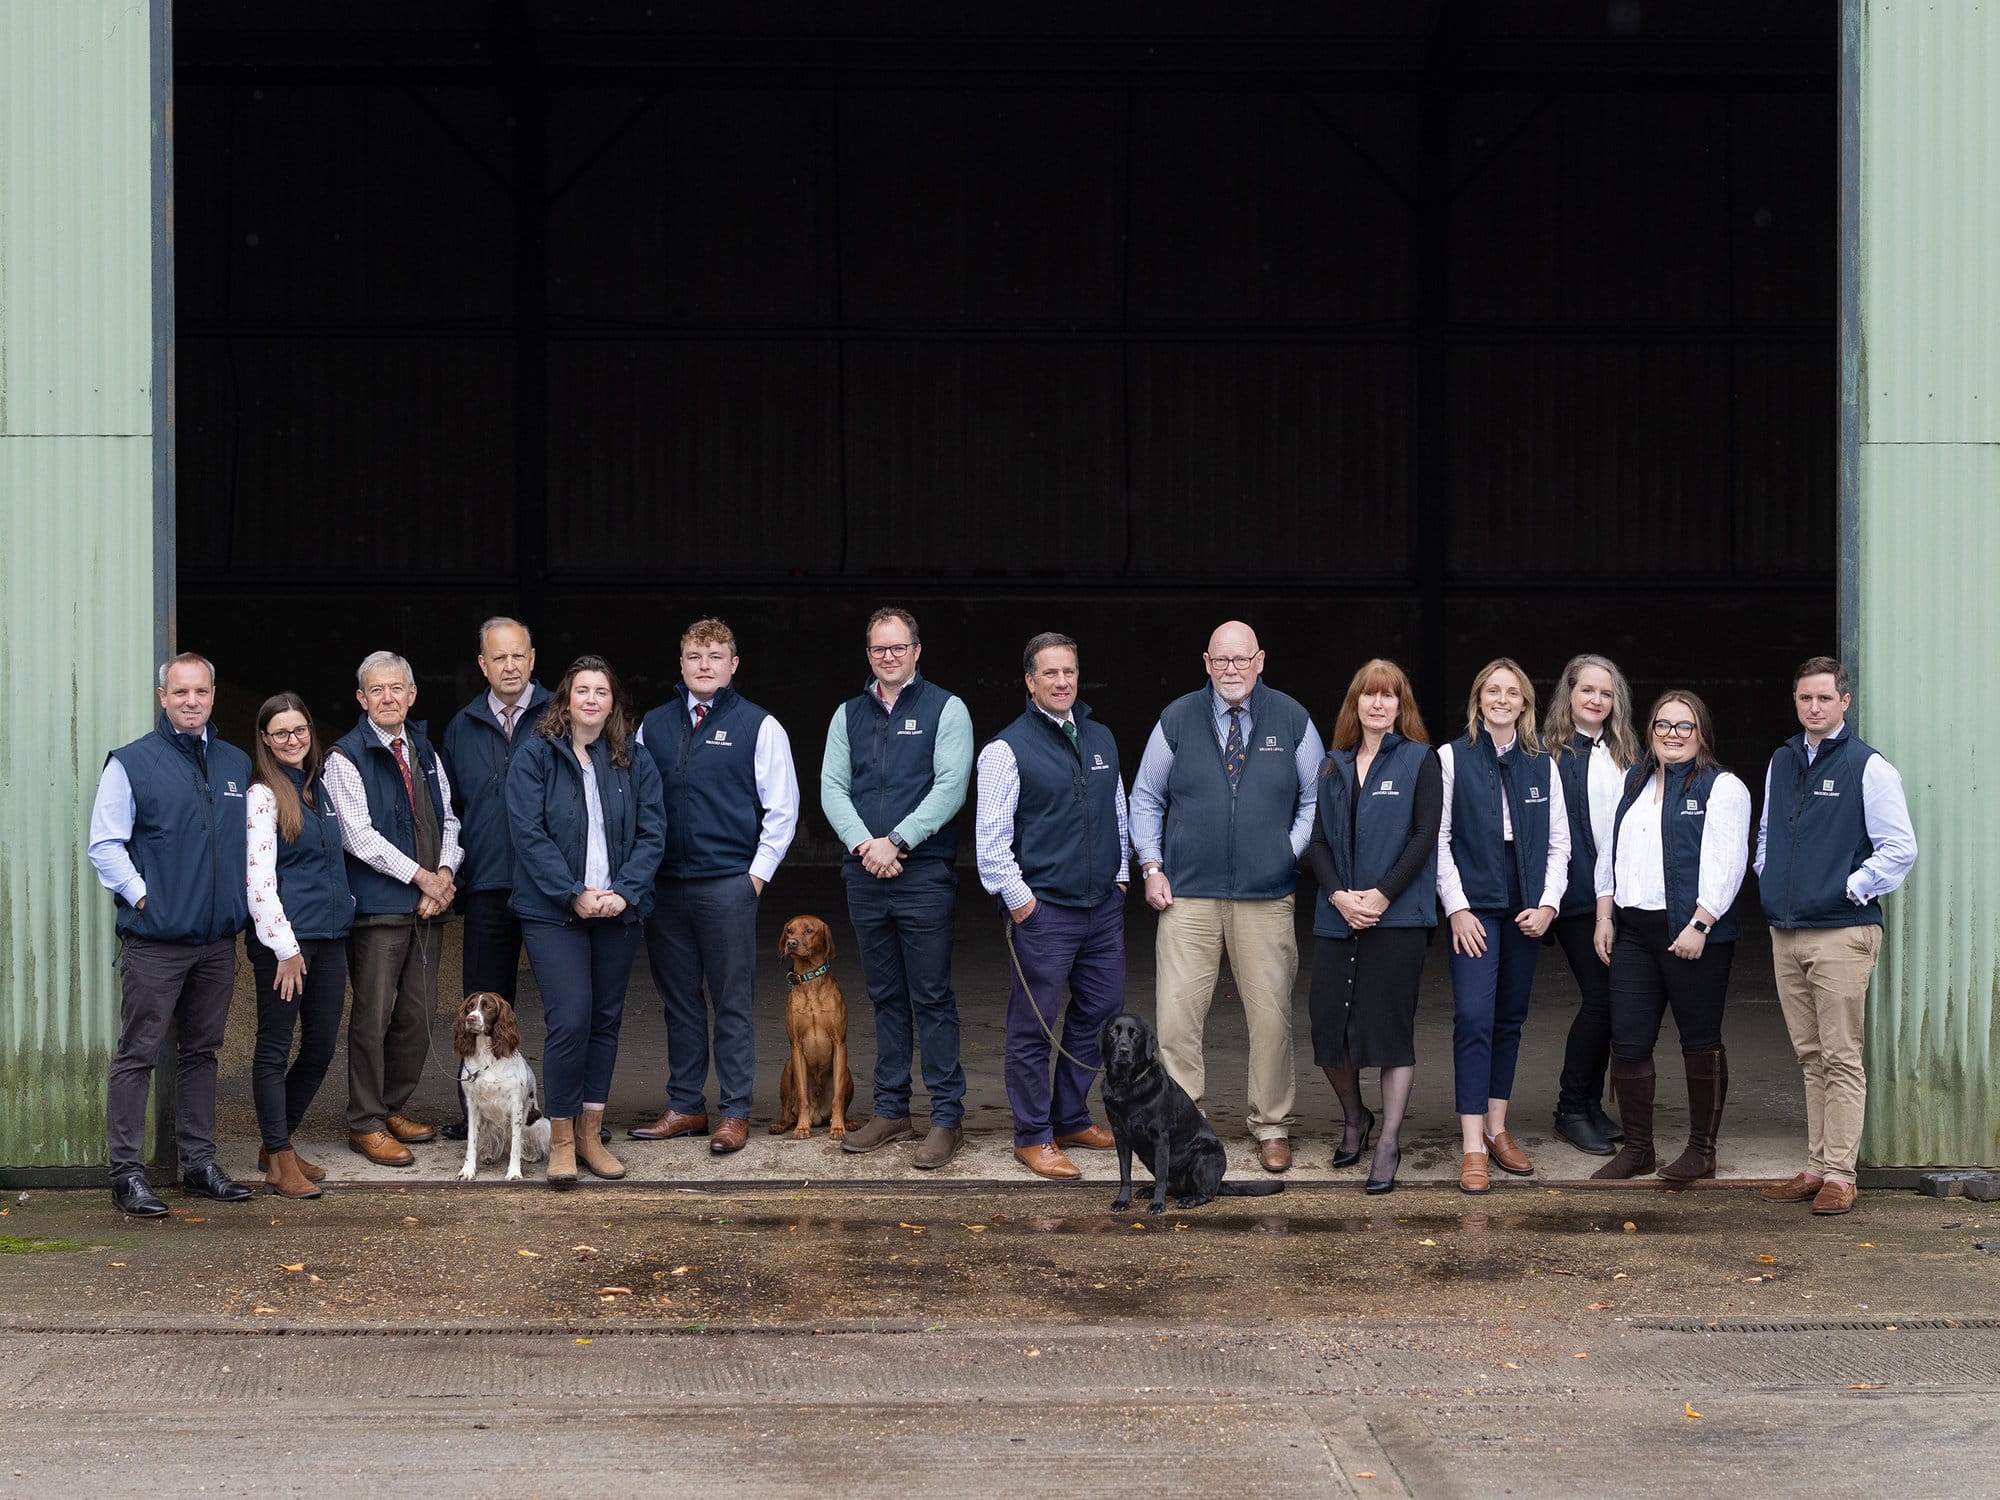 Brooks Leney Team pose in a barn doorway during a Commercial Photoshoot with Alison McKenny Photography